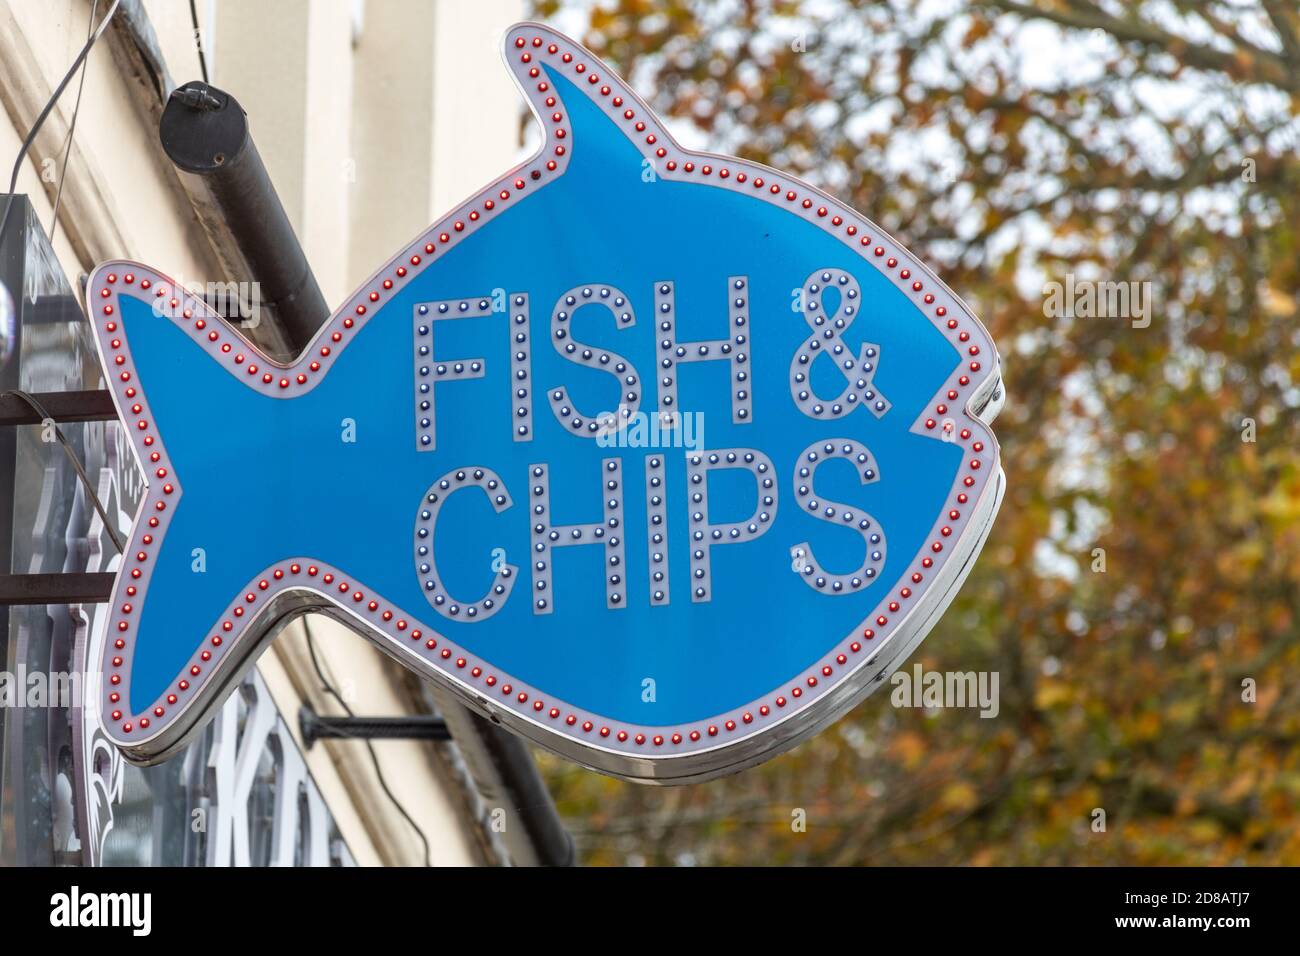 Fish & chips sign outside a takeaway food shop, UK Stock Photo